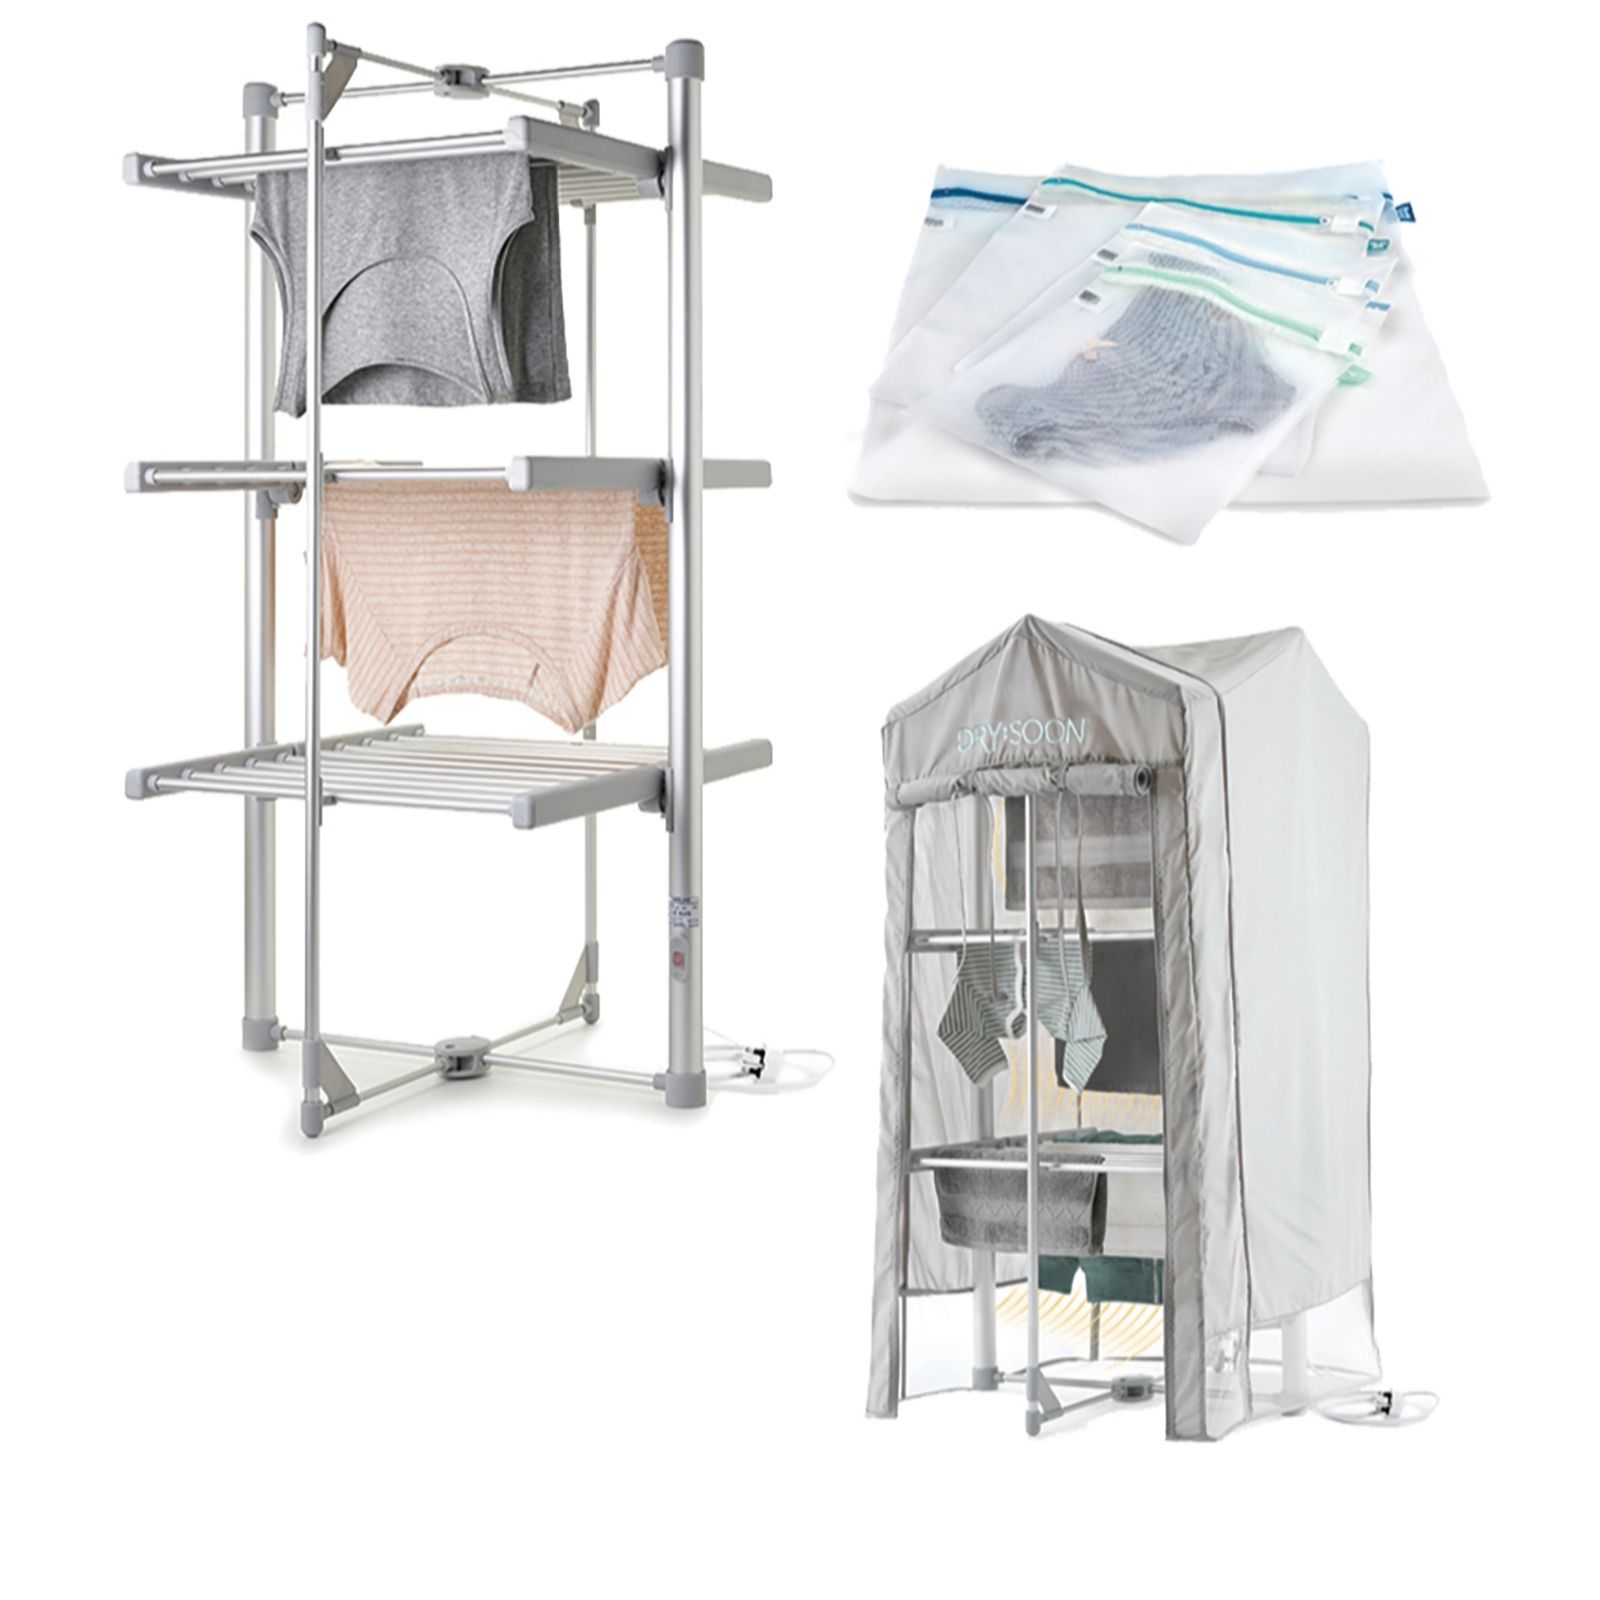 Dry:Soon Mini 3-Tier Heated Clothes Airer & Cover